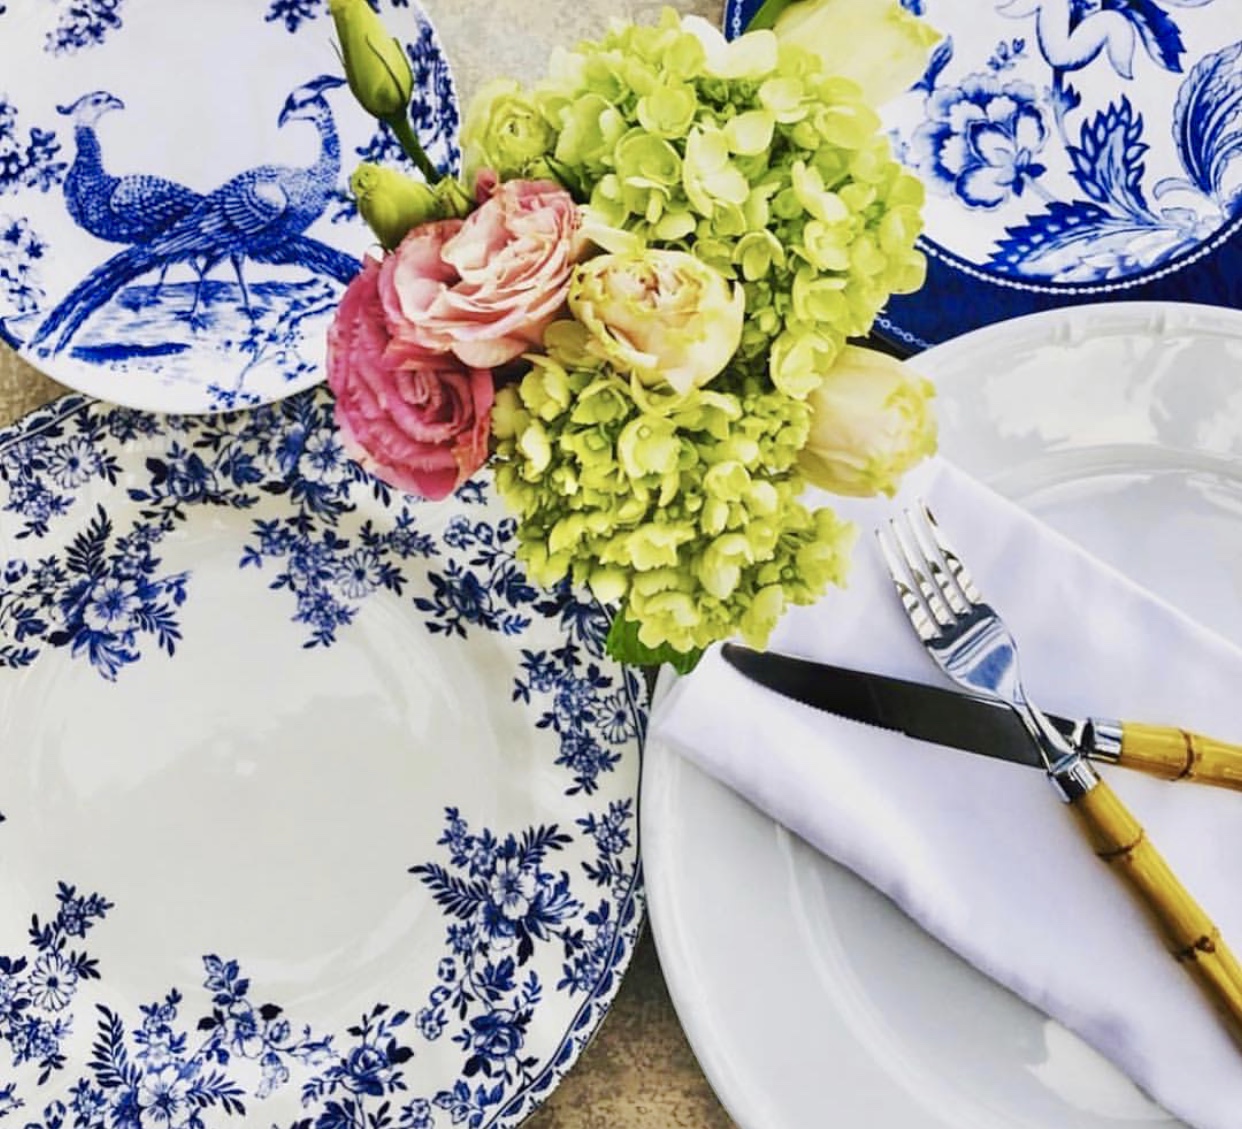 blue and white place setting